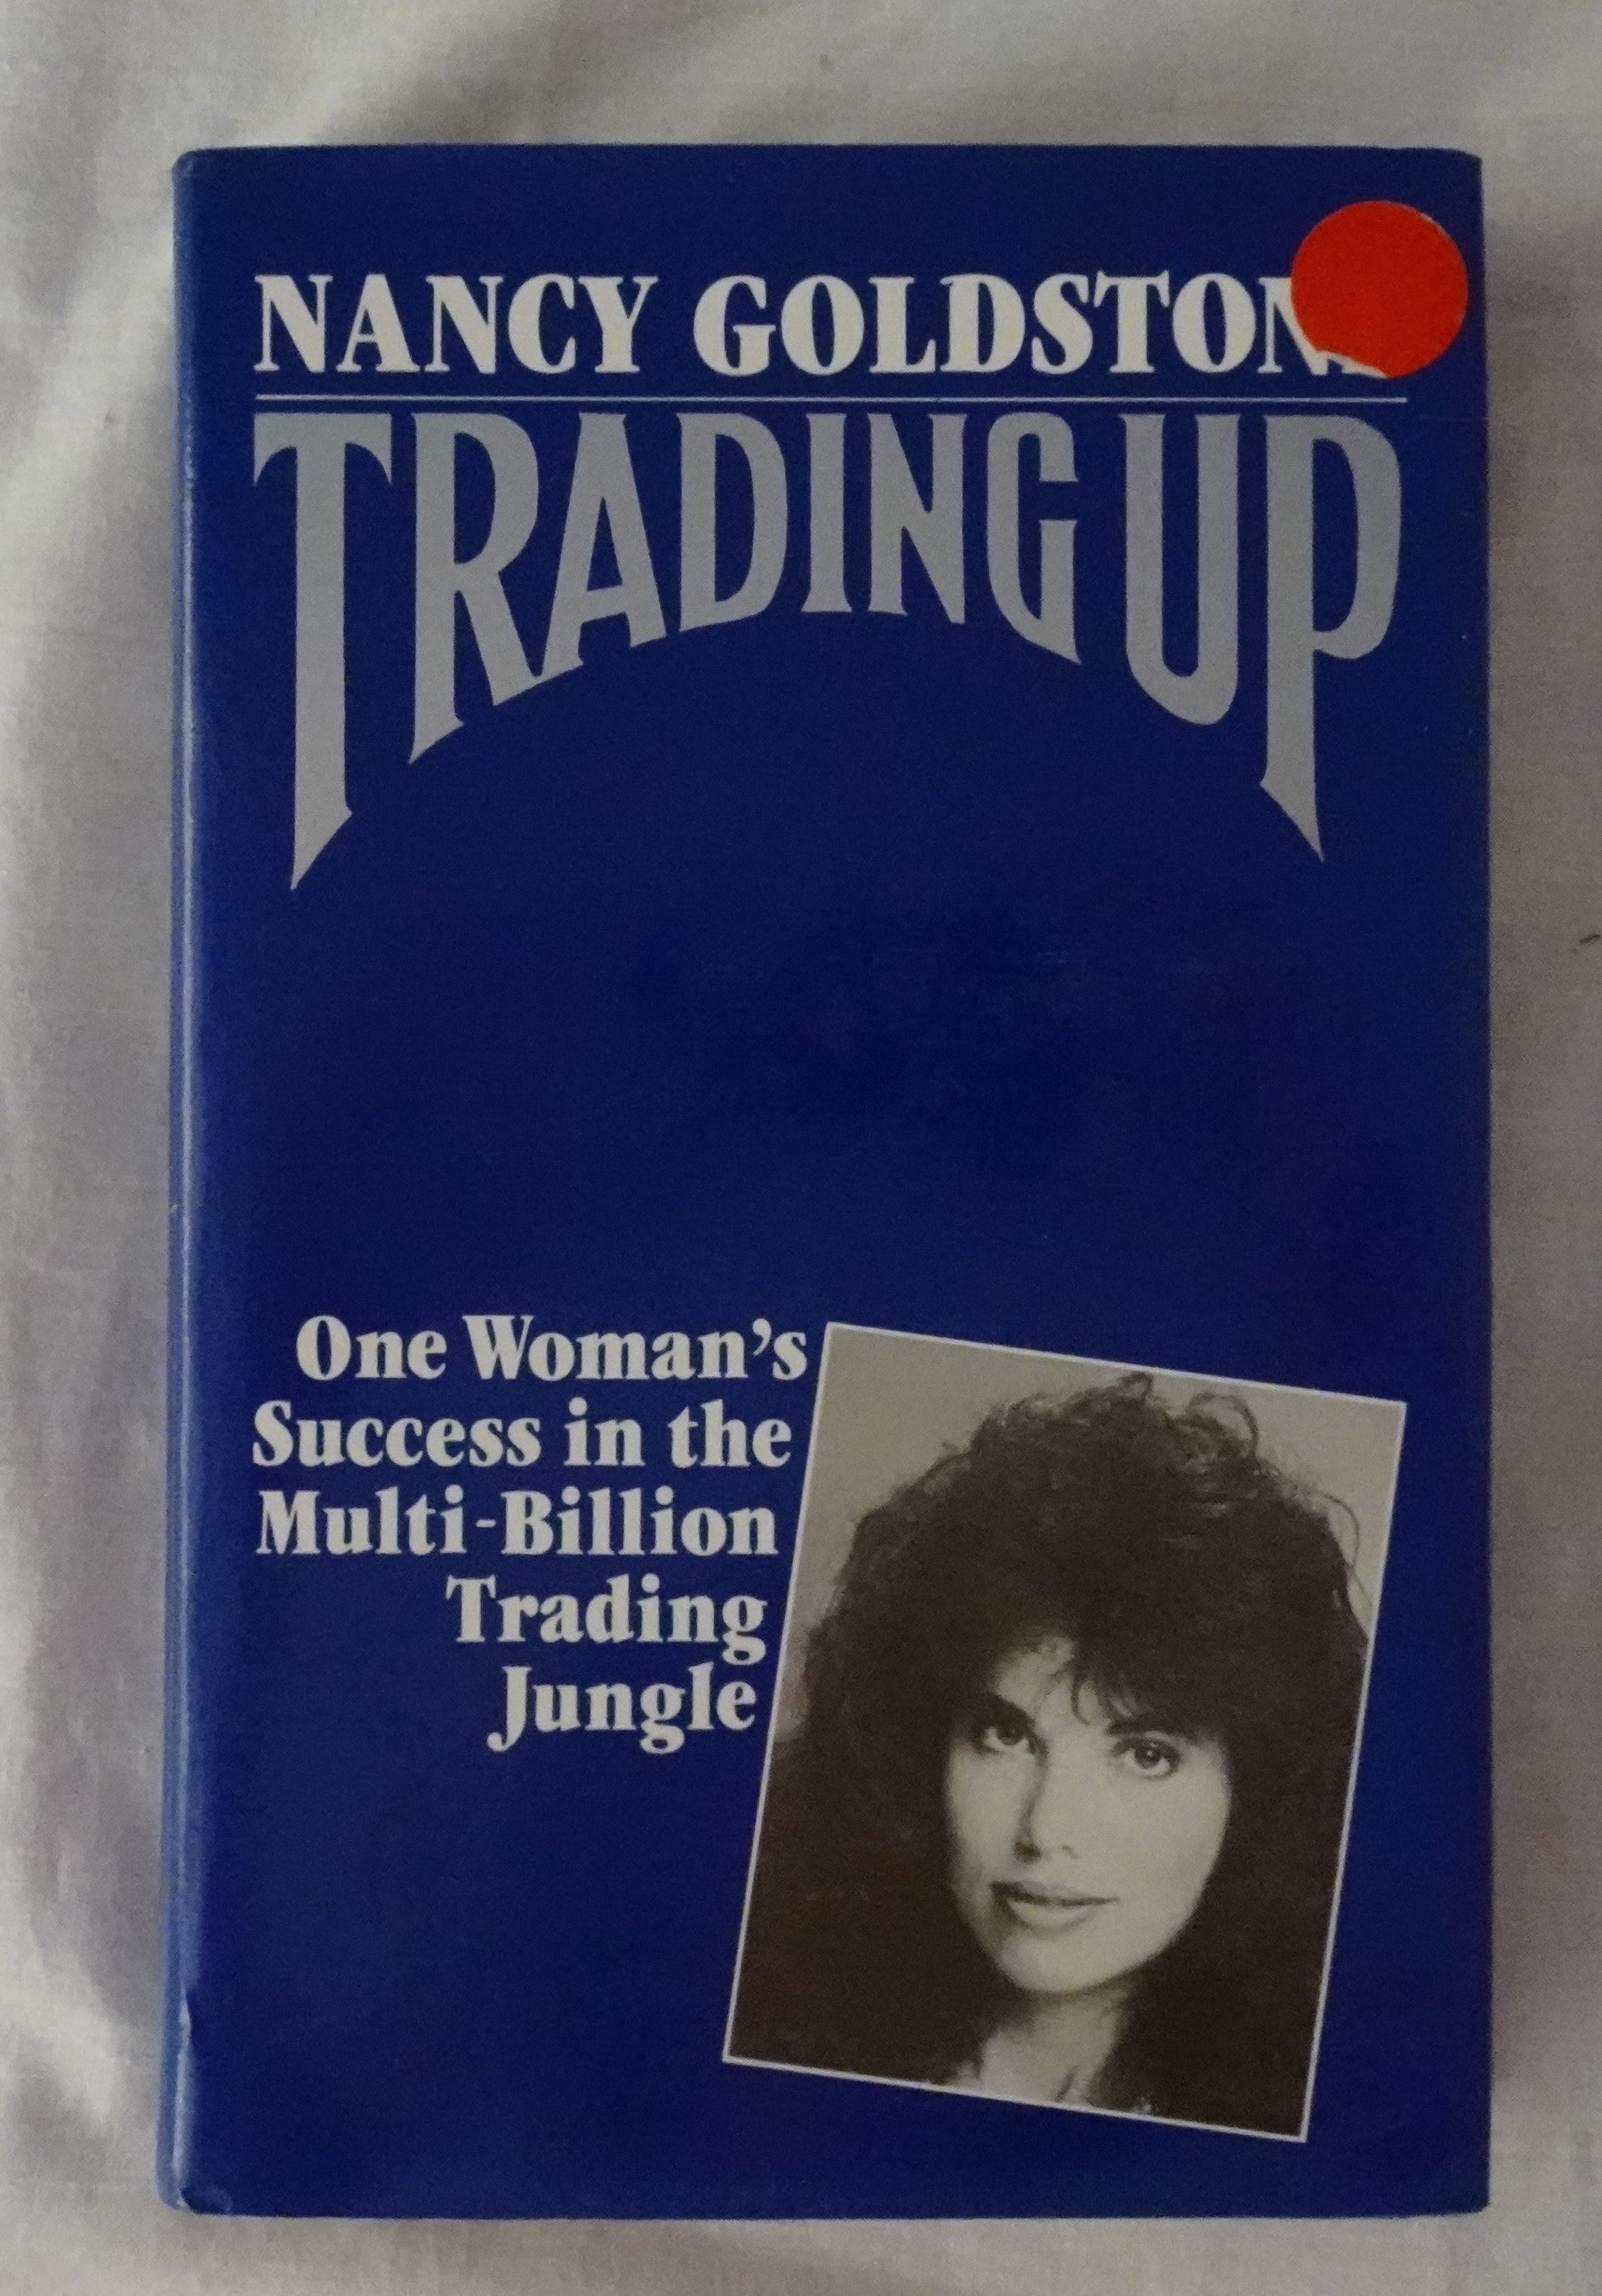 Trading Up  One Woman’s Success in the Multi-Billion Trading Jungle  by Nancy Goldstone